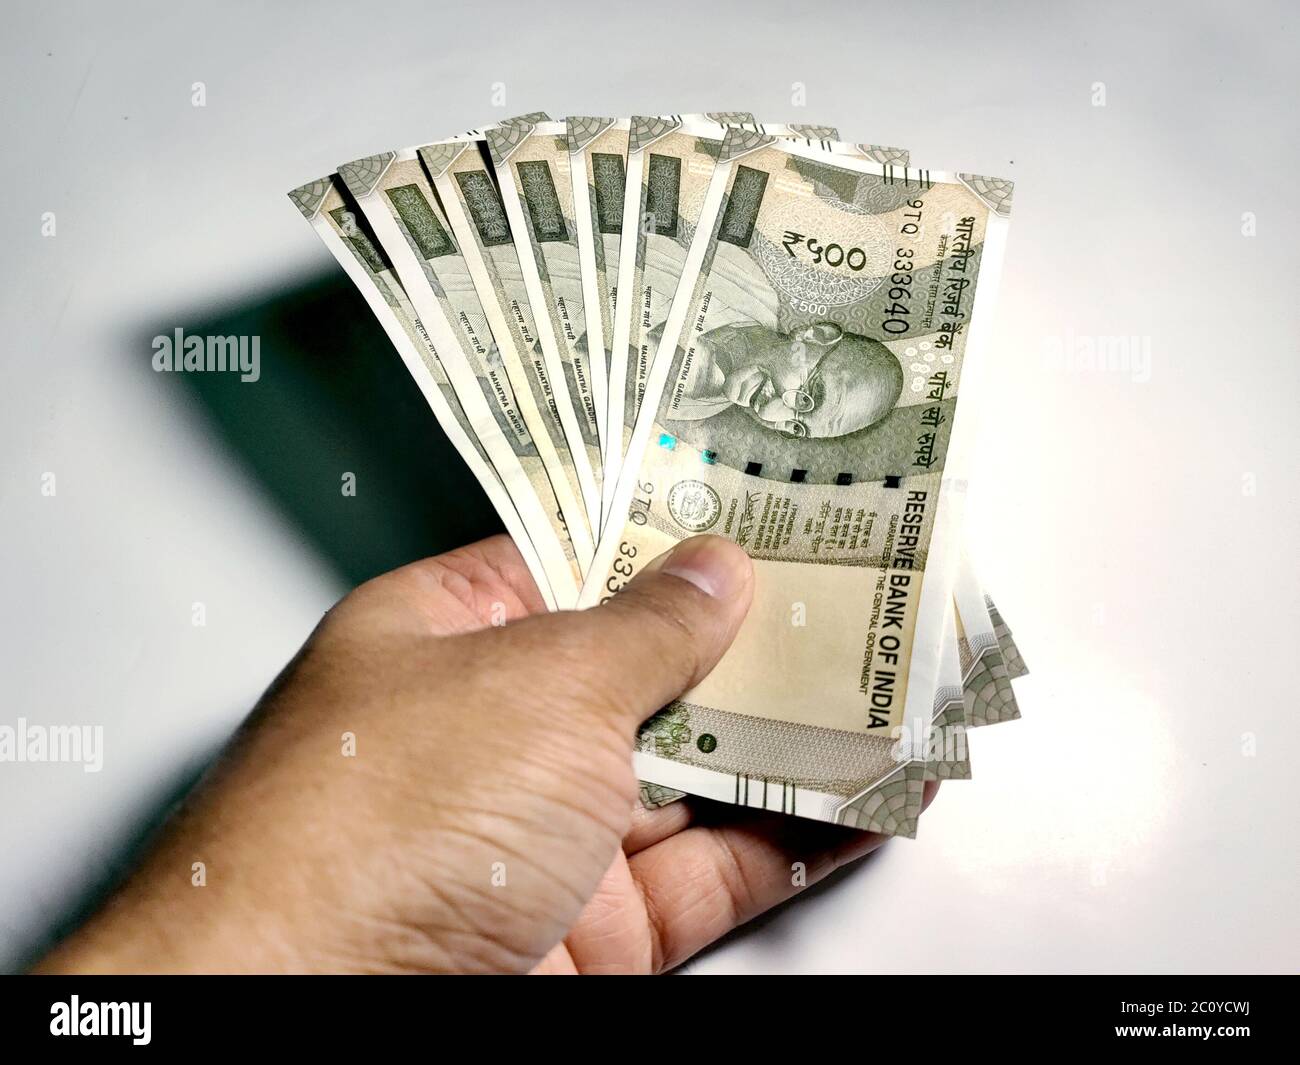 Hand holding five hundred Indian rupee notes against white background Stock Photo